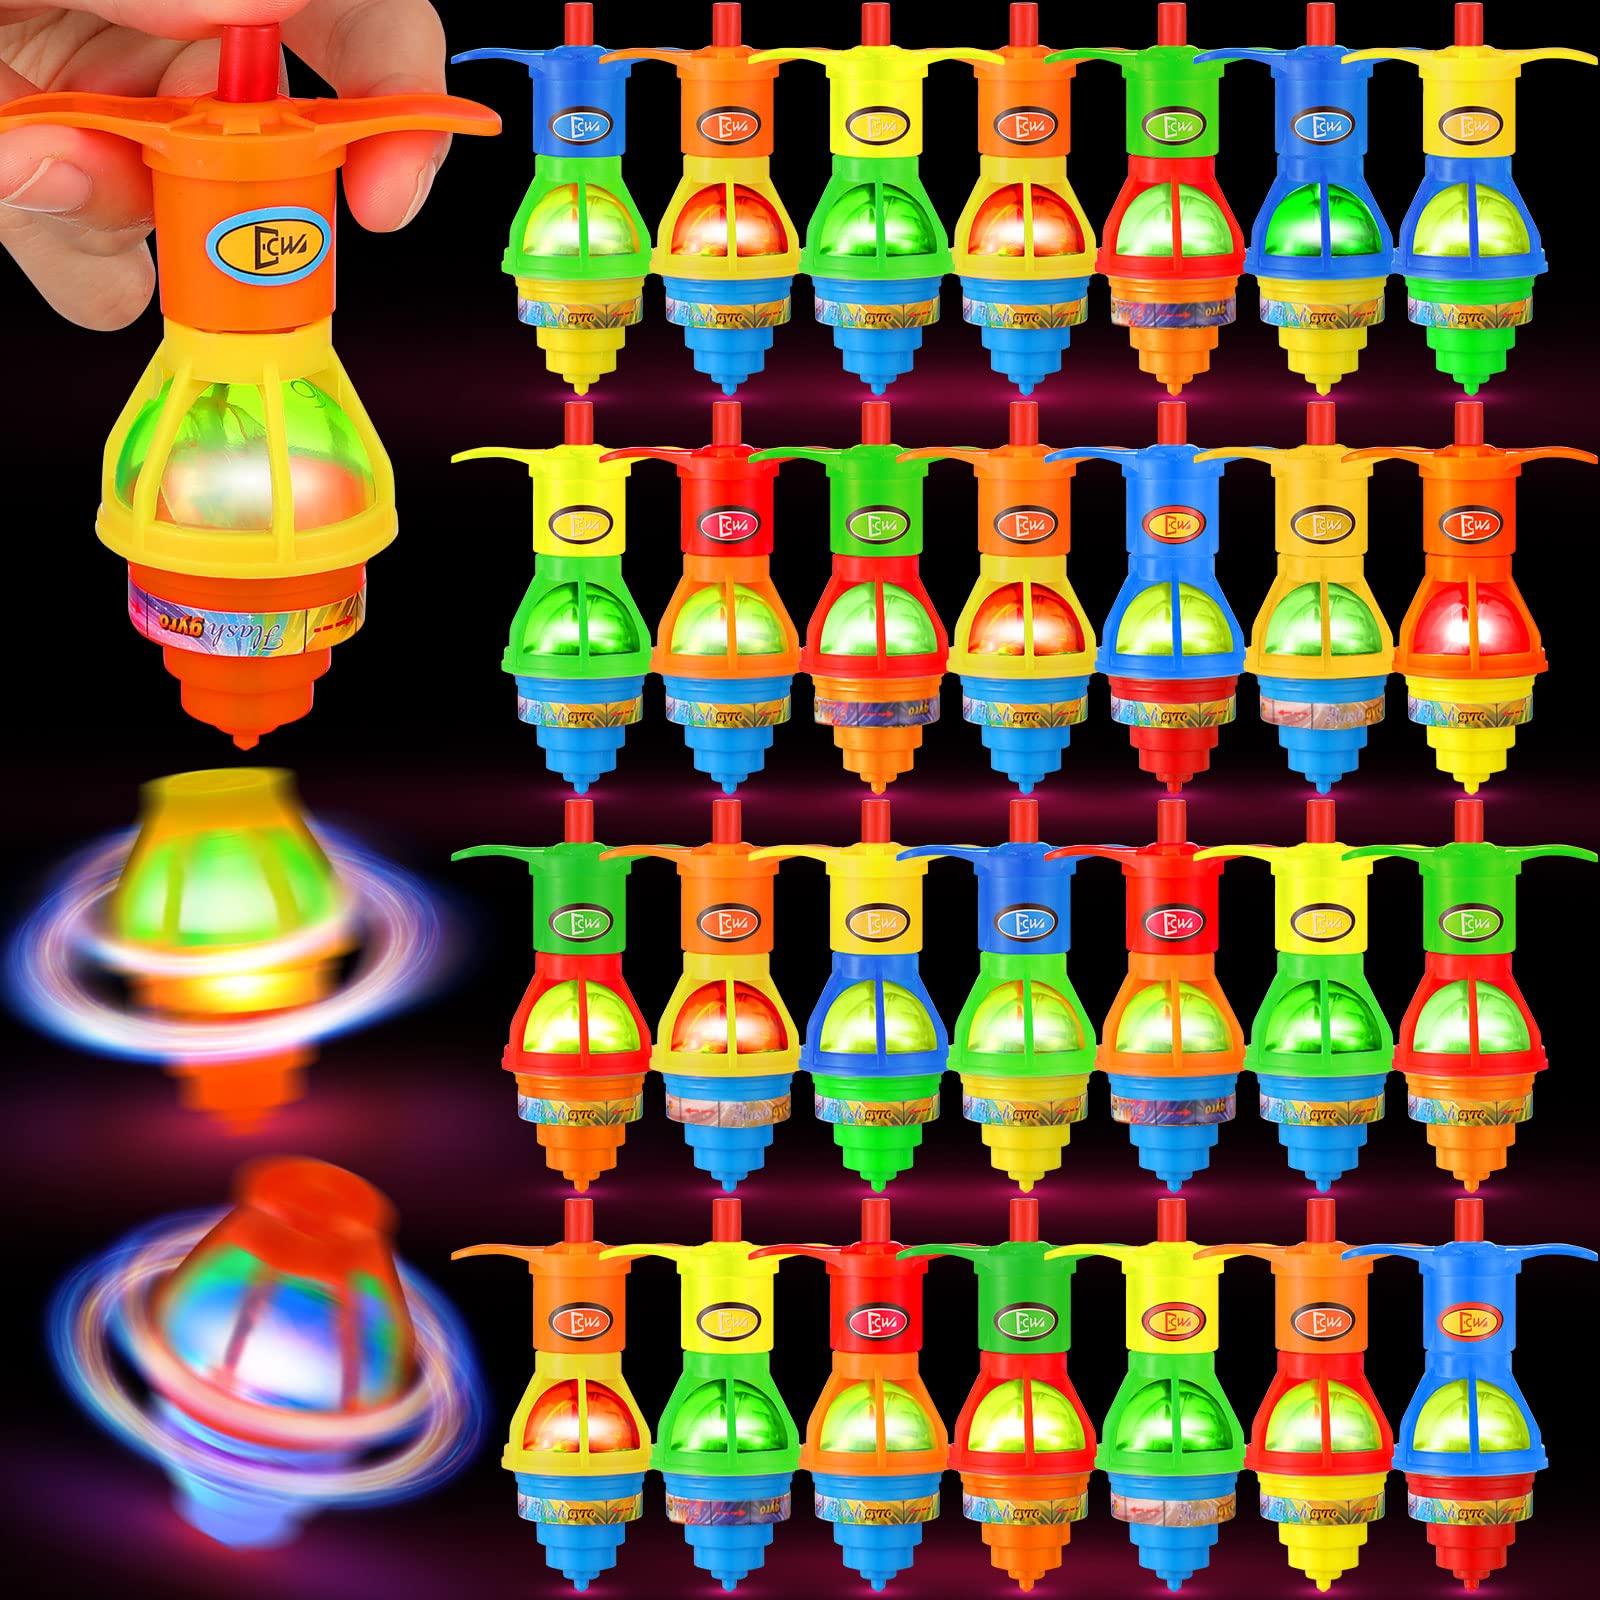 Bulk LED Light Up Spinner Tops Launcher with Gyroscope Motion Colorful Flashing Spinner Toys Novelty Bulk Toys Party Favor Goodie Bag Fillers Gifts Stuffers for Birthday Party Favors (50 Pcs)